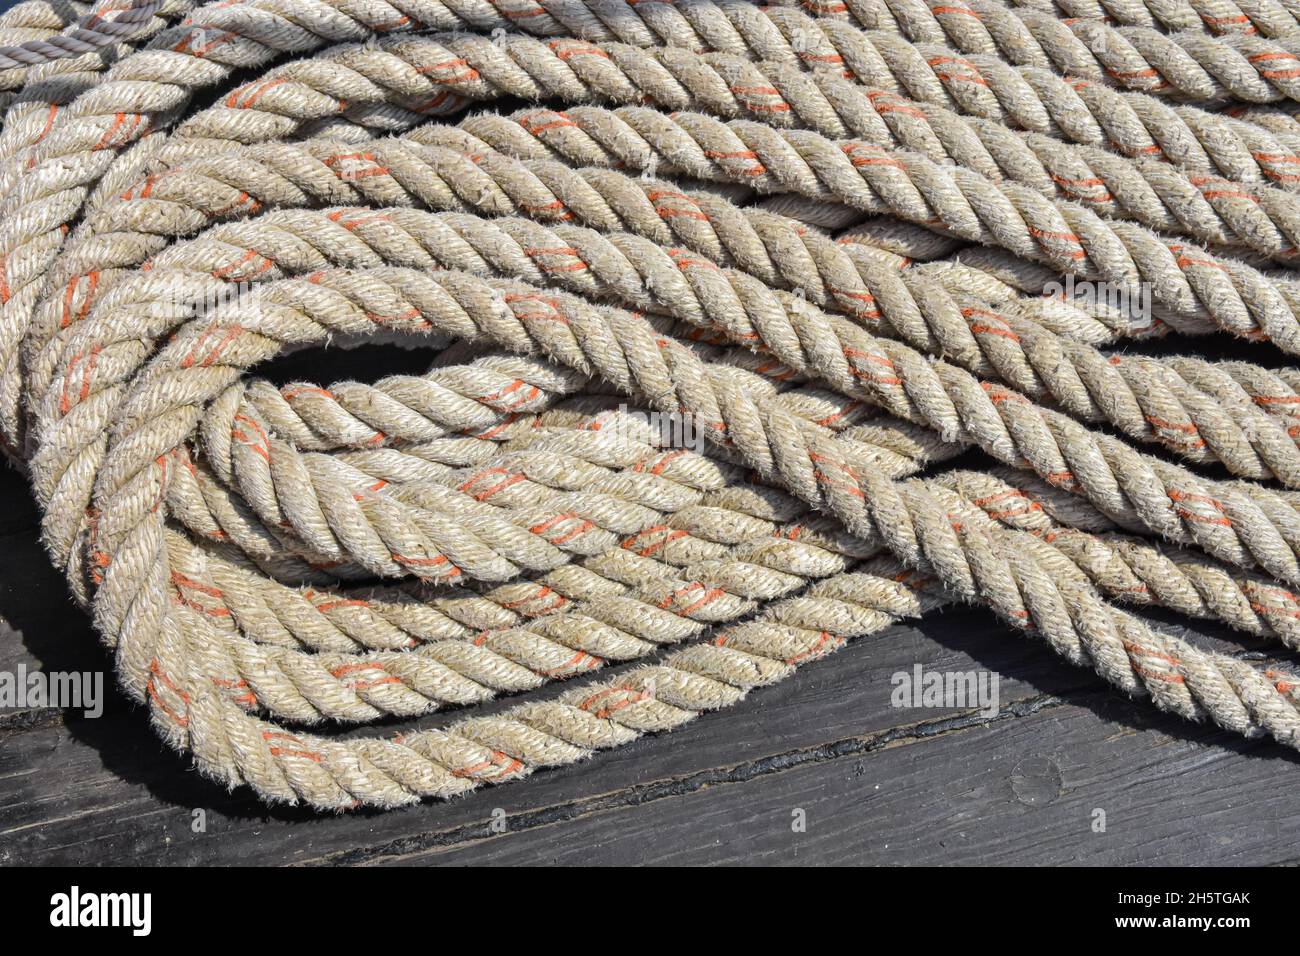 Rope folded in a neat and orderly pattern on the deck of a sailing vessel. Stock Photo